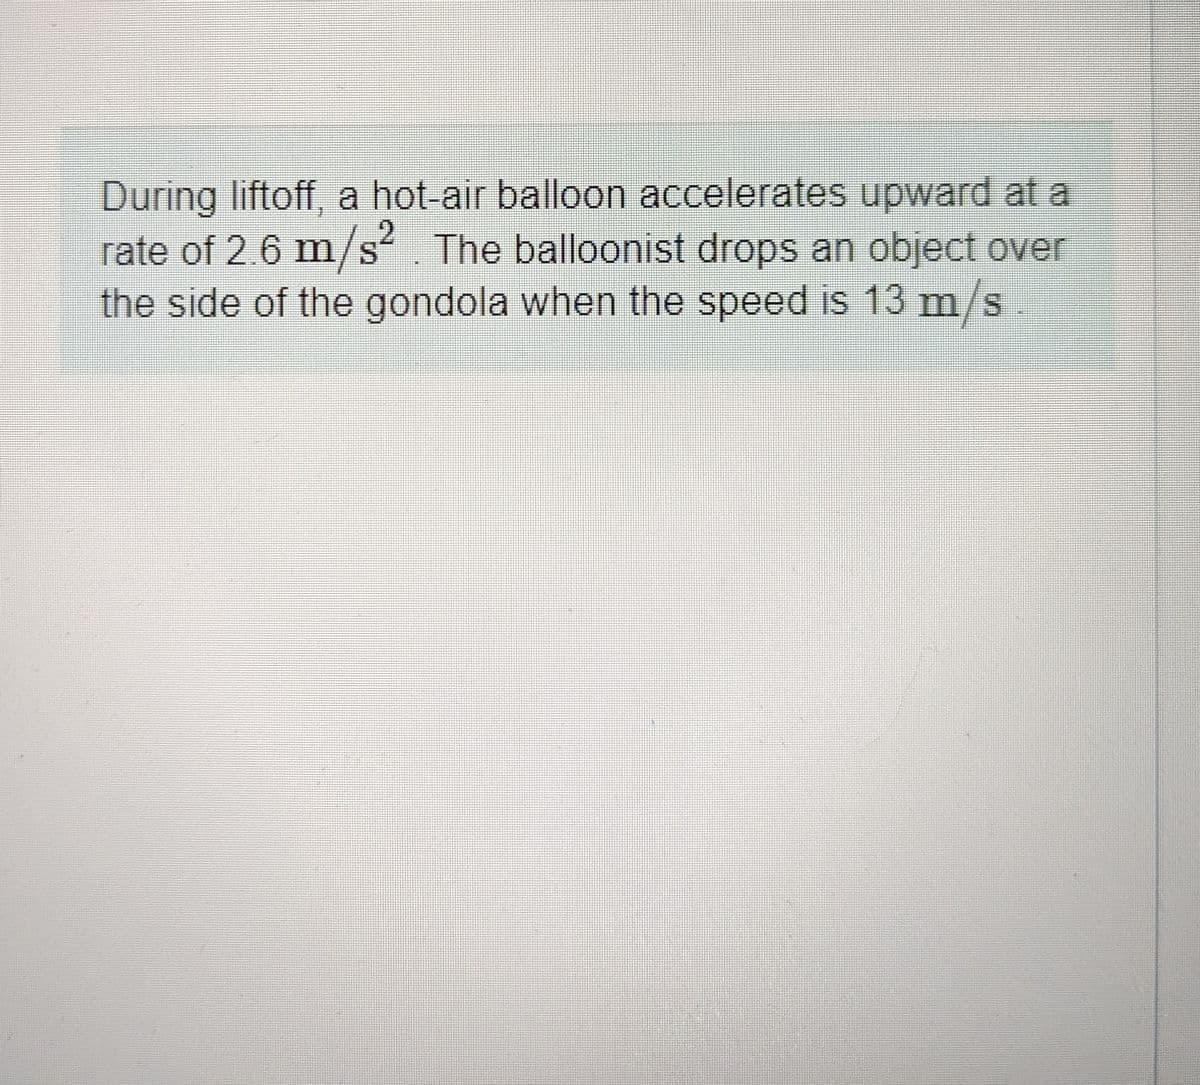 During liftoff, a hot-air balloon accelerates upward at a
rate of 2.6 m/s². The balloonist drops an object over
the side of the gondola when the speed is 13 m/s